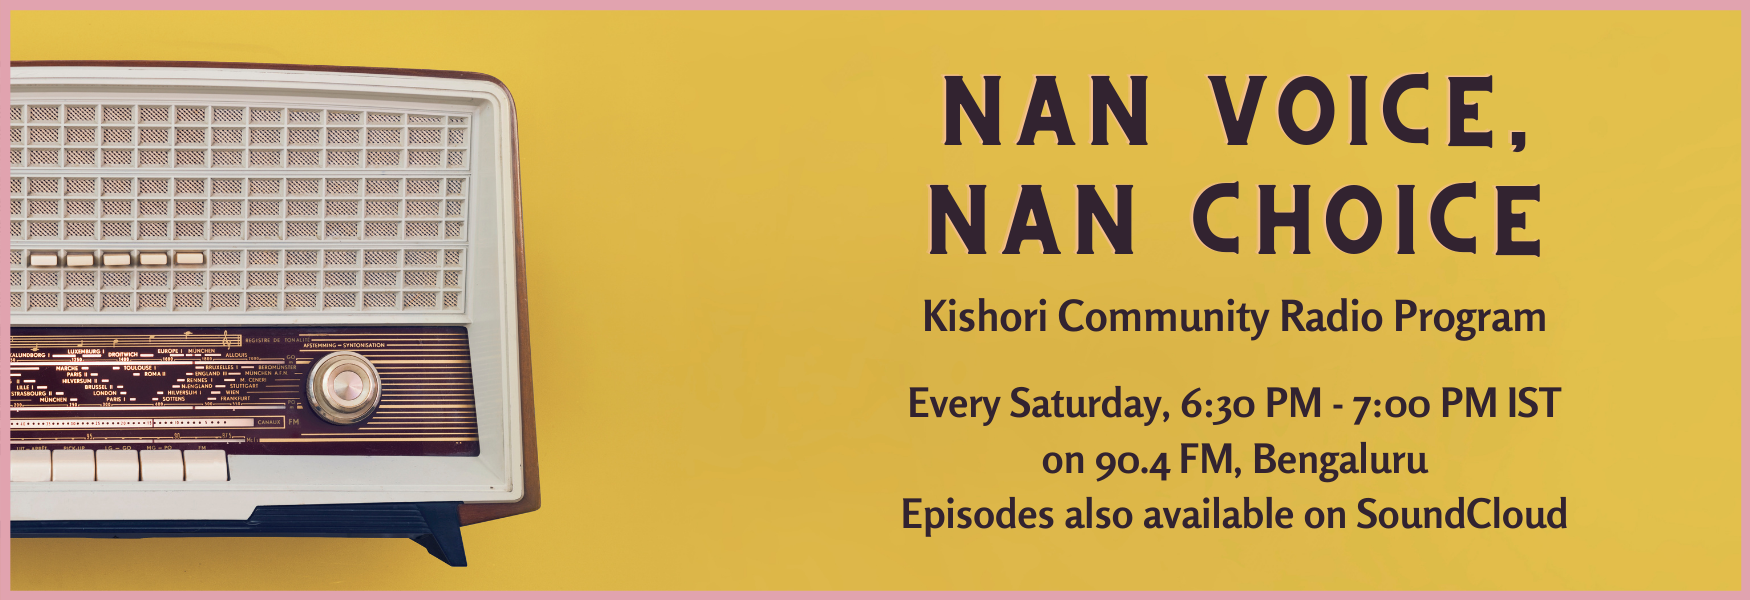 A picture of a radio set with a yellow background and pink border, on top of which is brown text. The text reads: Nan Voice, Nan Choice. Kishori Community Radio Program. Every Saturday, 7:00 PM IST on 90.4 FM. Bengaluru, Episodes also available on SoundCloud.